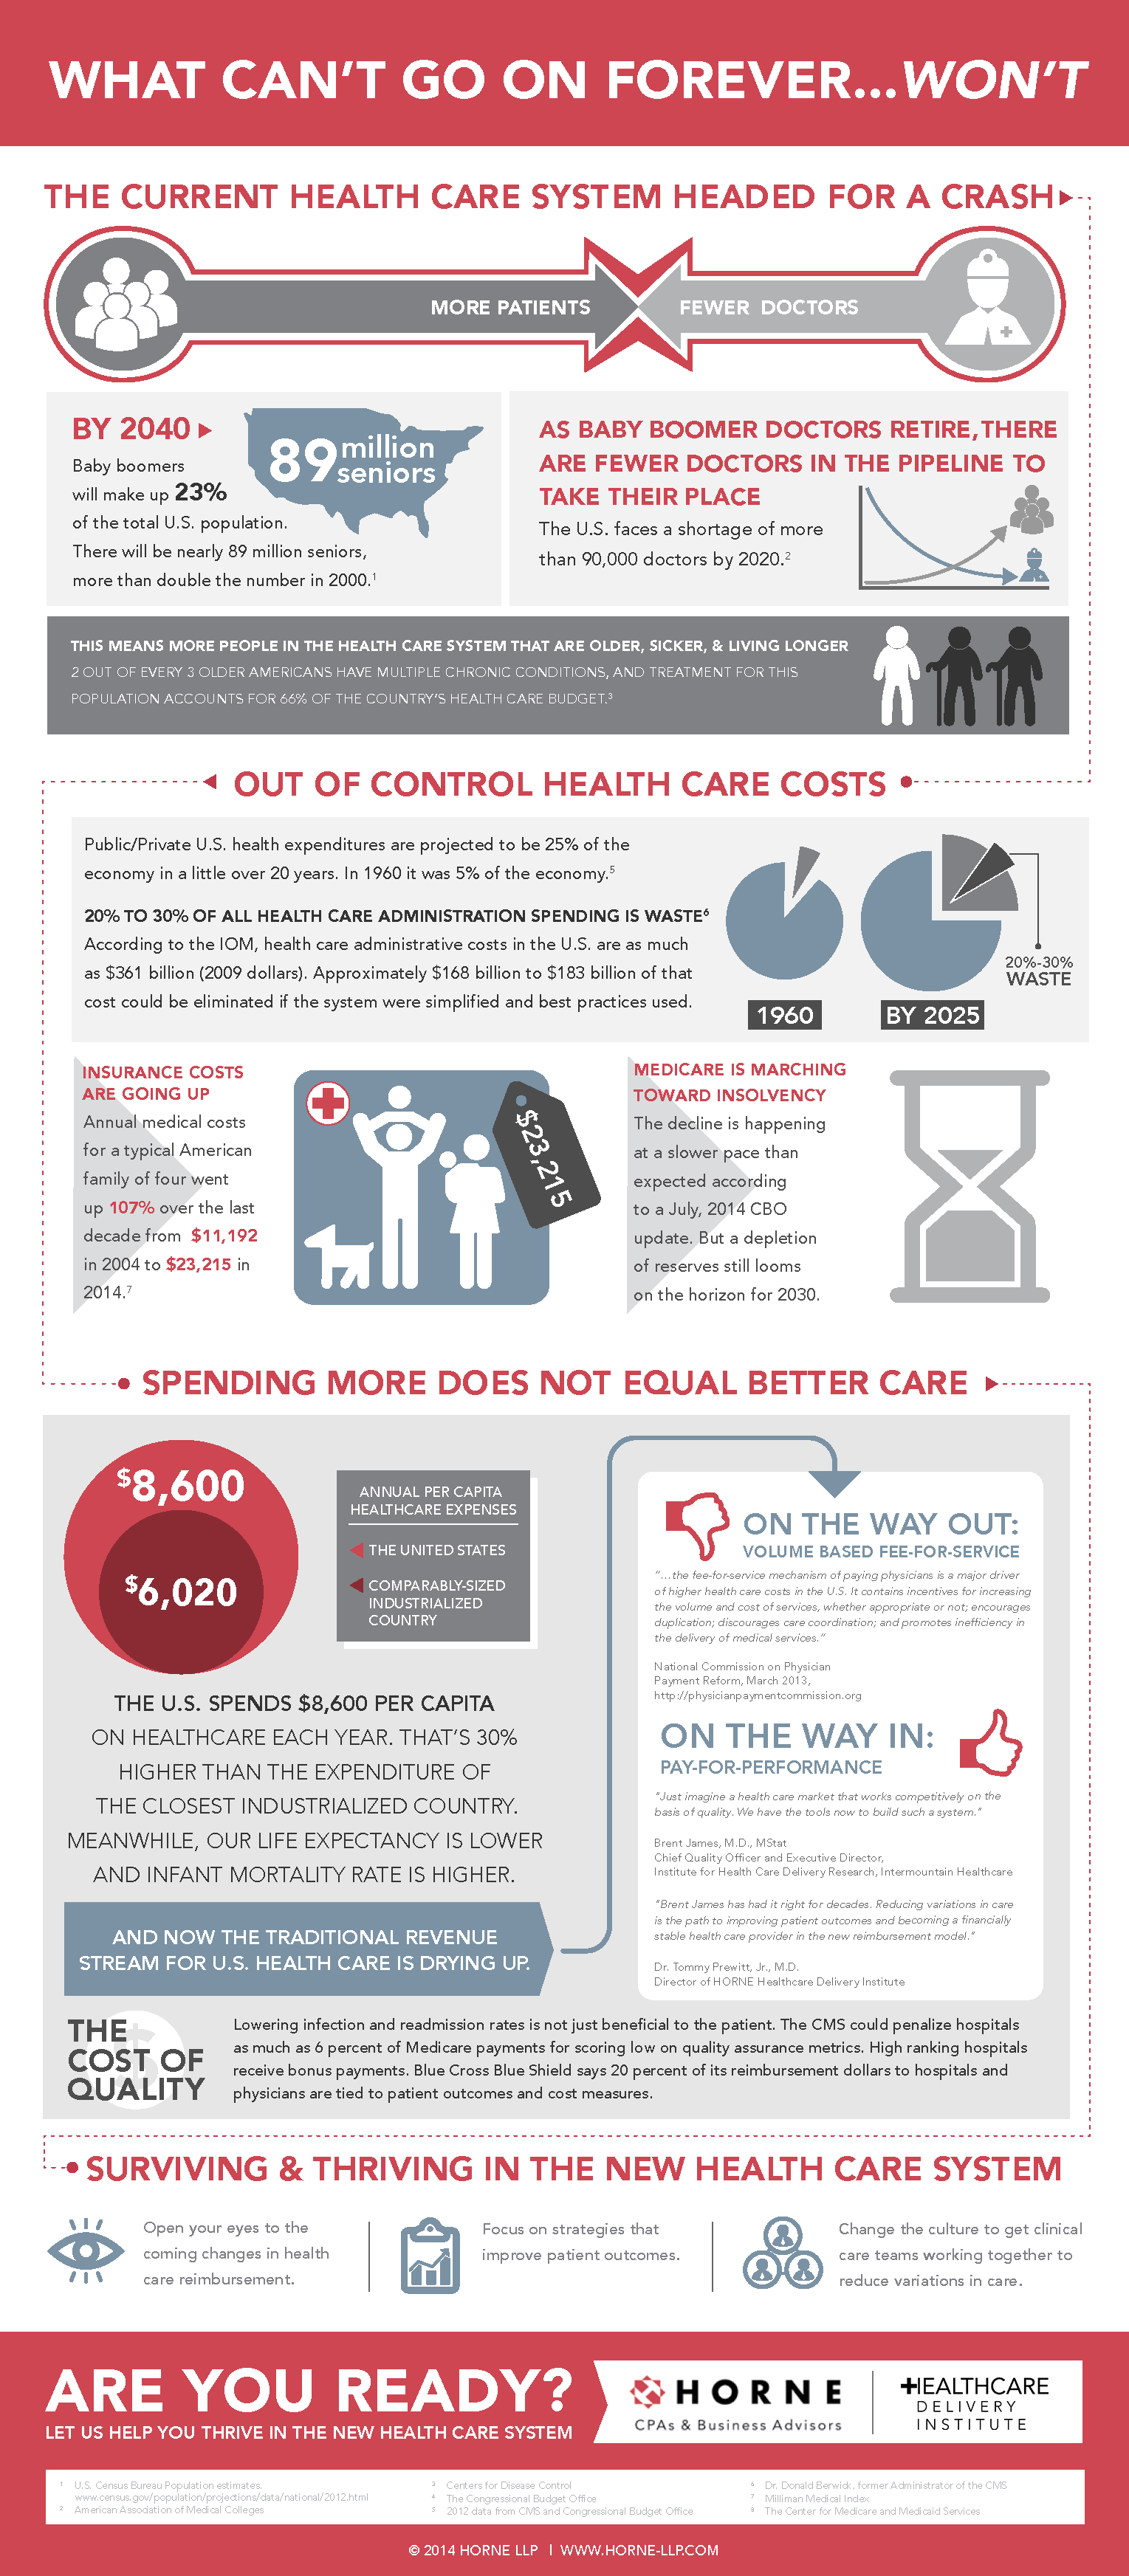 Where the American Healthcare System is Headed [Infographic] | Carah Counts | Employer Healthcare Strategies blog by CareATC, Inc.